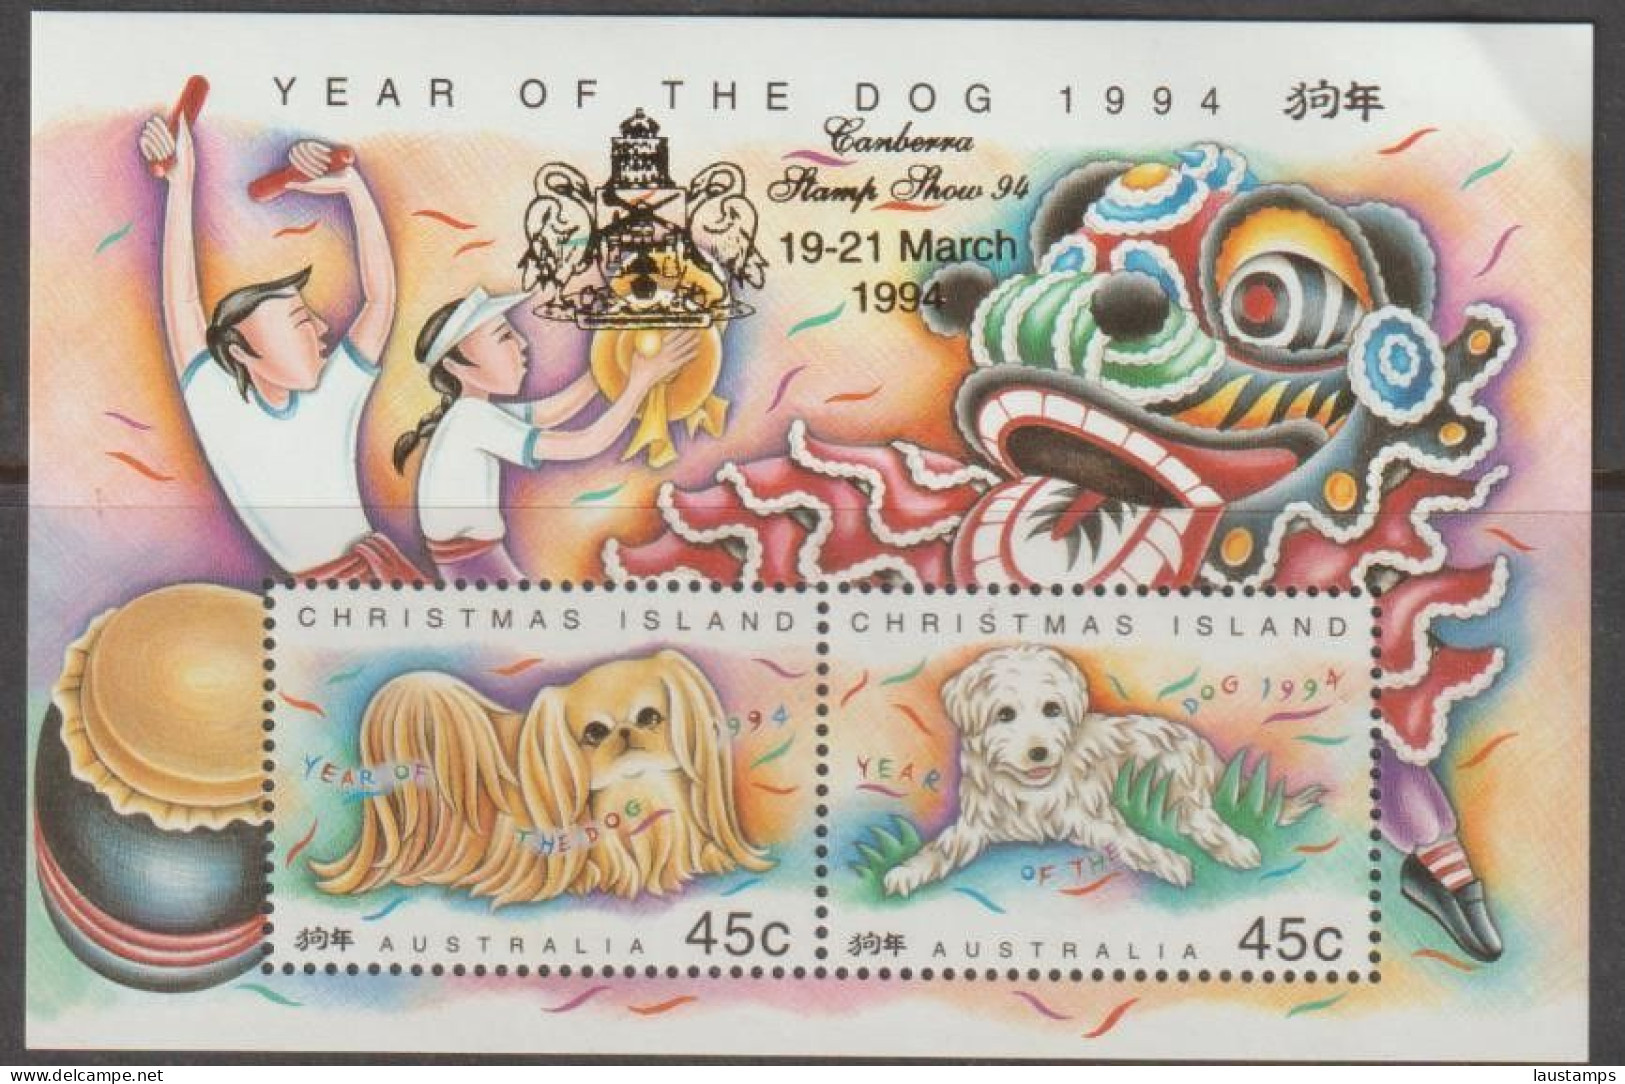 Christmas Island 1994 Year Of The Dog Ovpt Canberra Stamps Show S/S MNH - Chinees Nieuwjaar